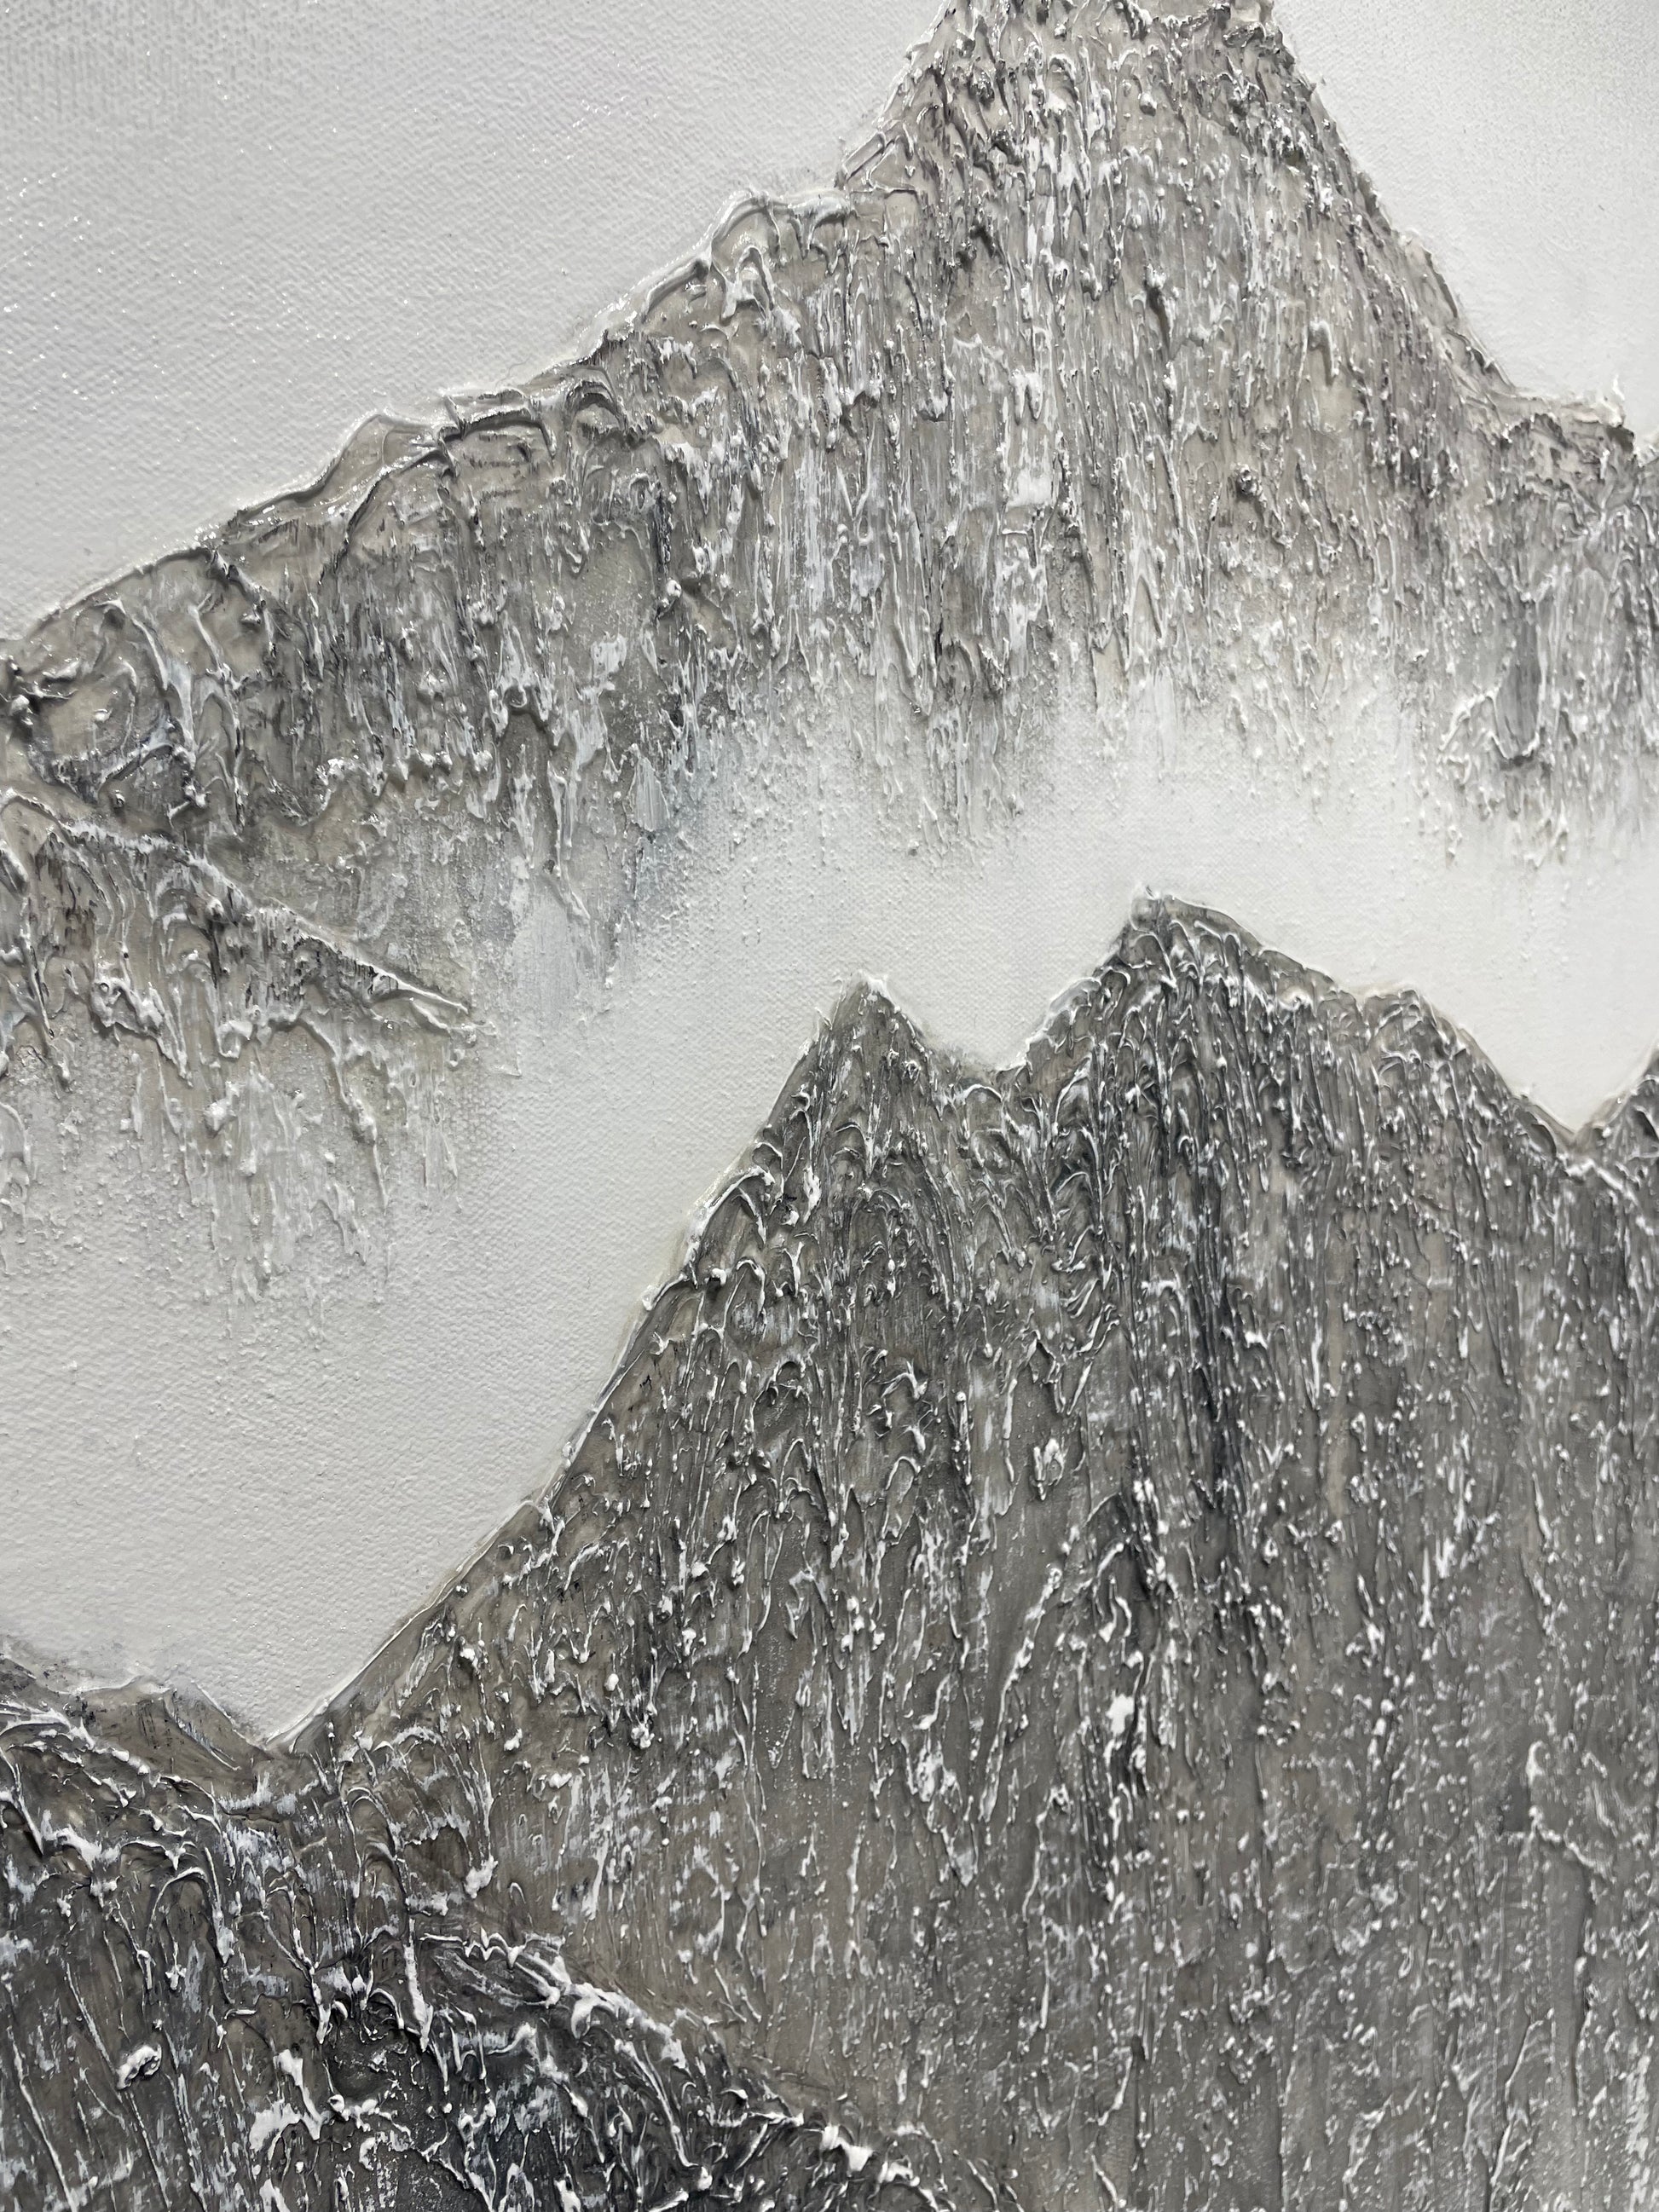 Large Abstract Textured Mountain Landscape Painting: Banded Peak - Ashley Alexandra